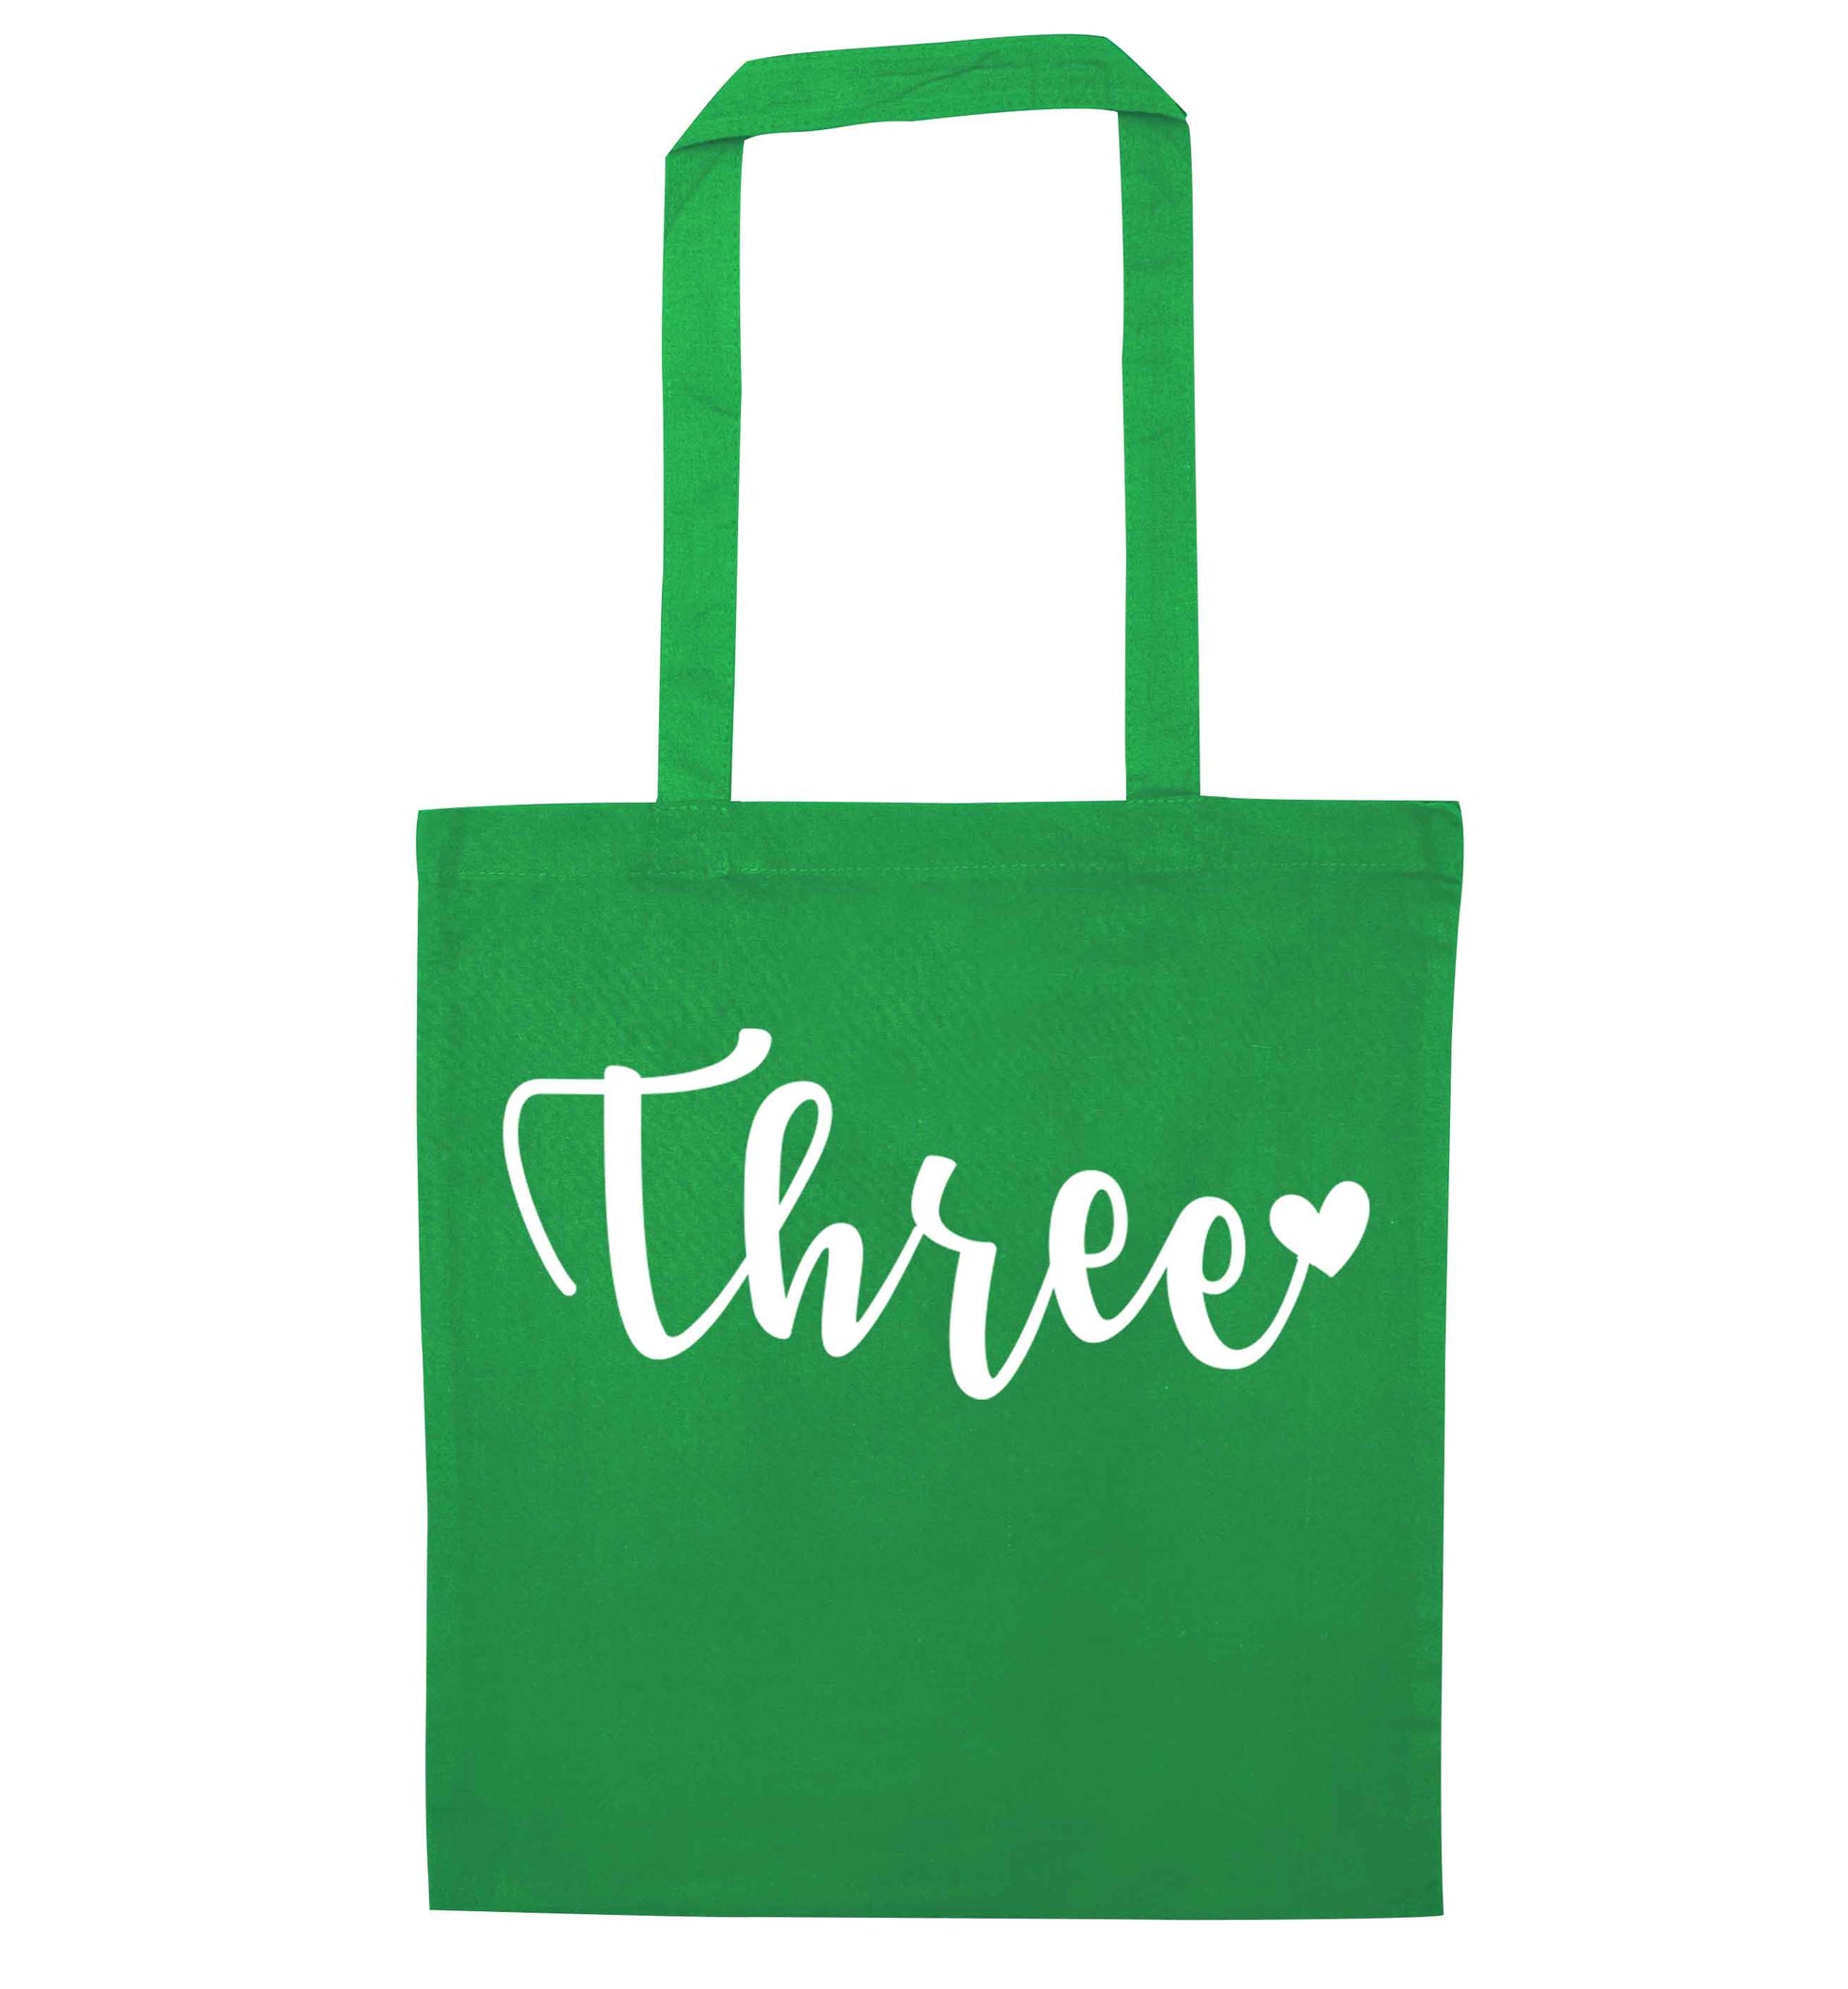 Two and Heart green tote bag